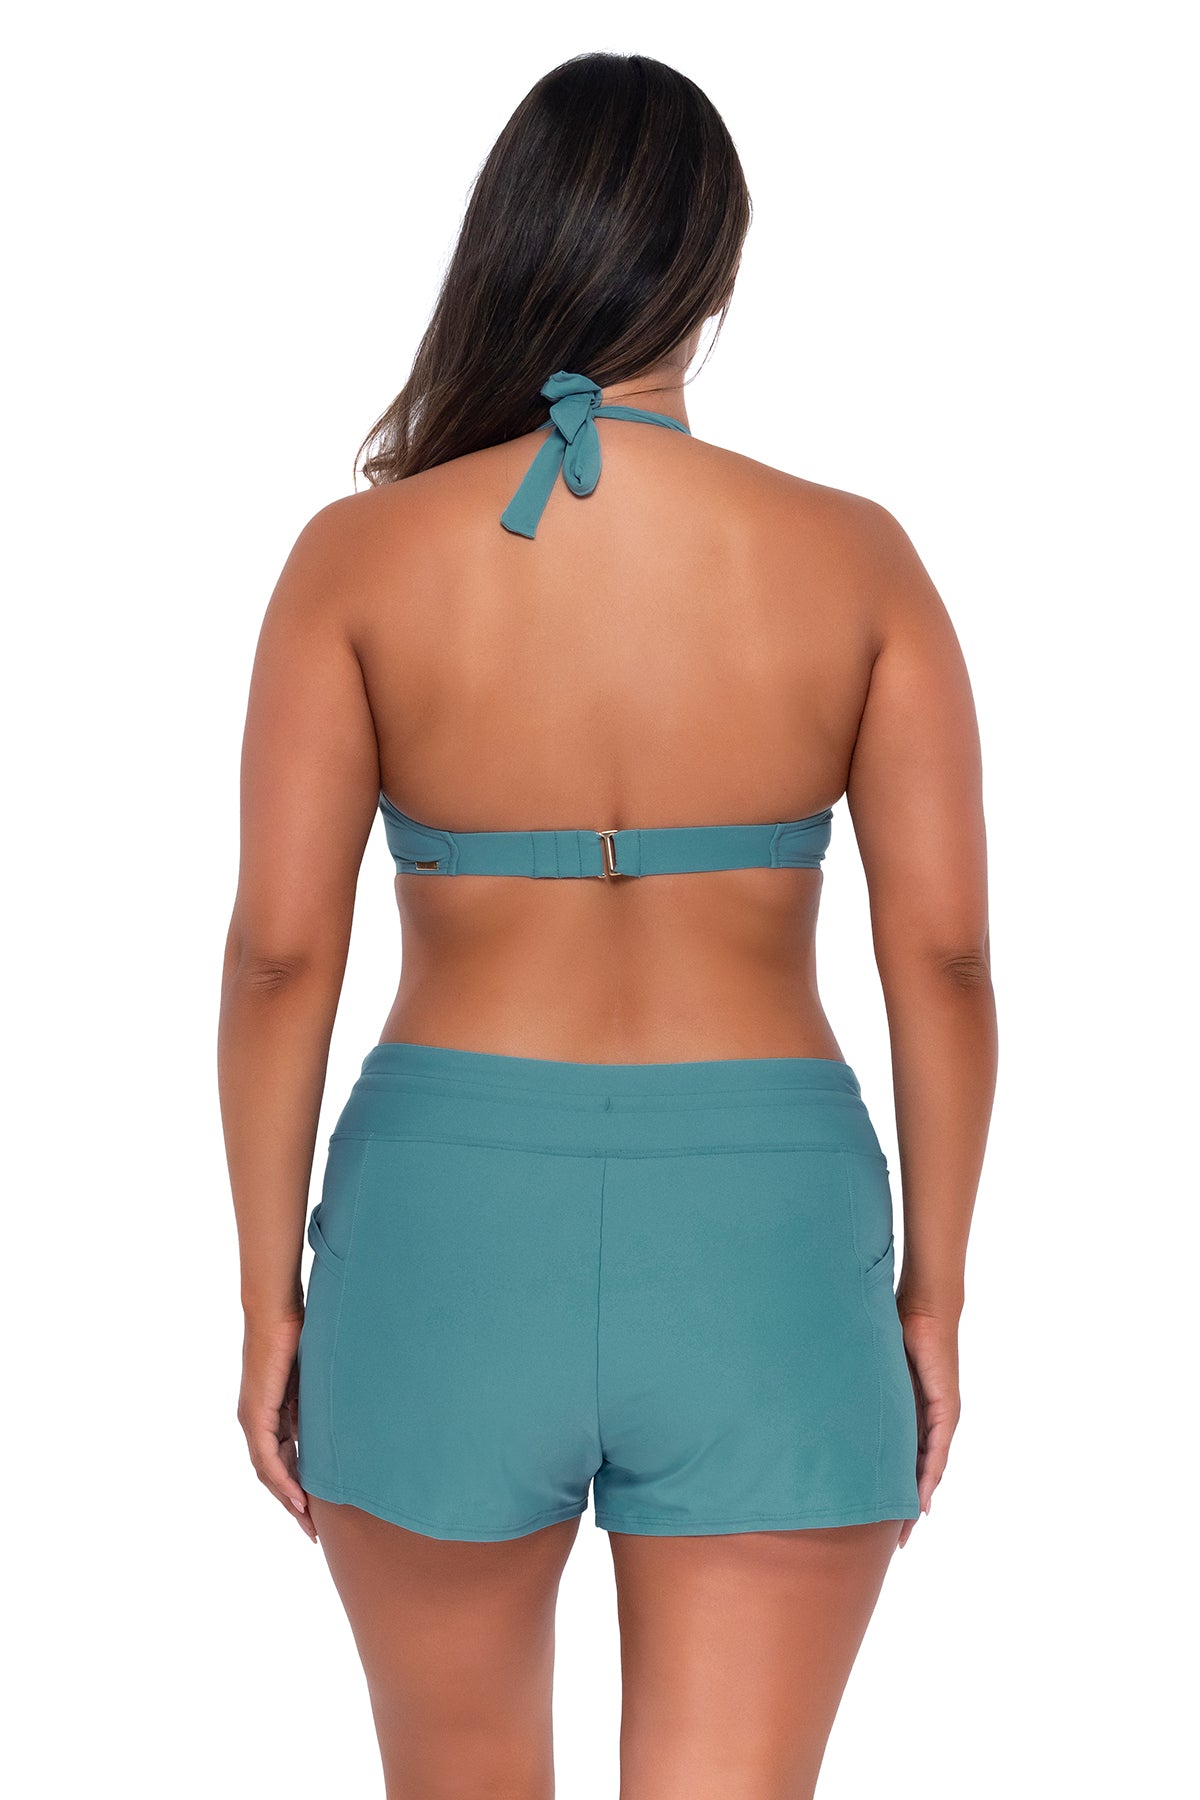 Sunsets Ocean Muse Halter Top